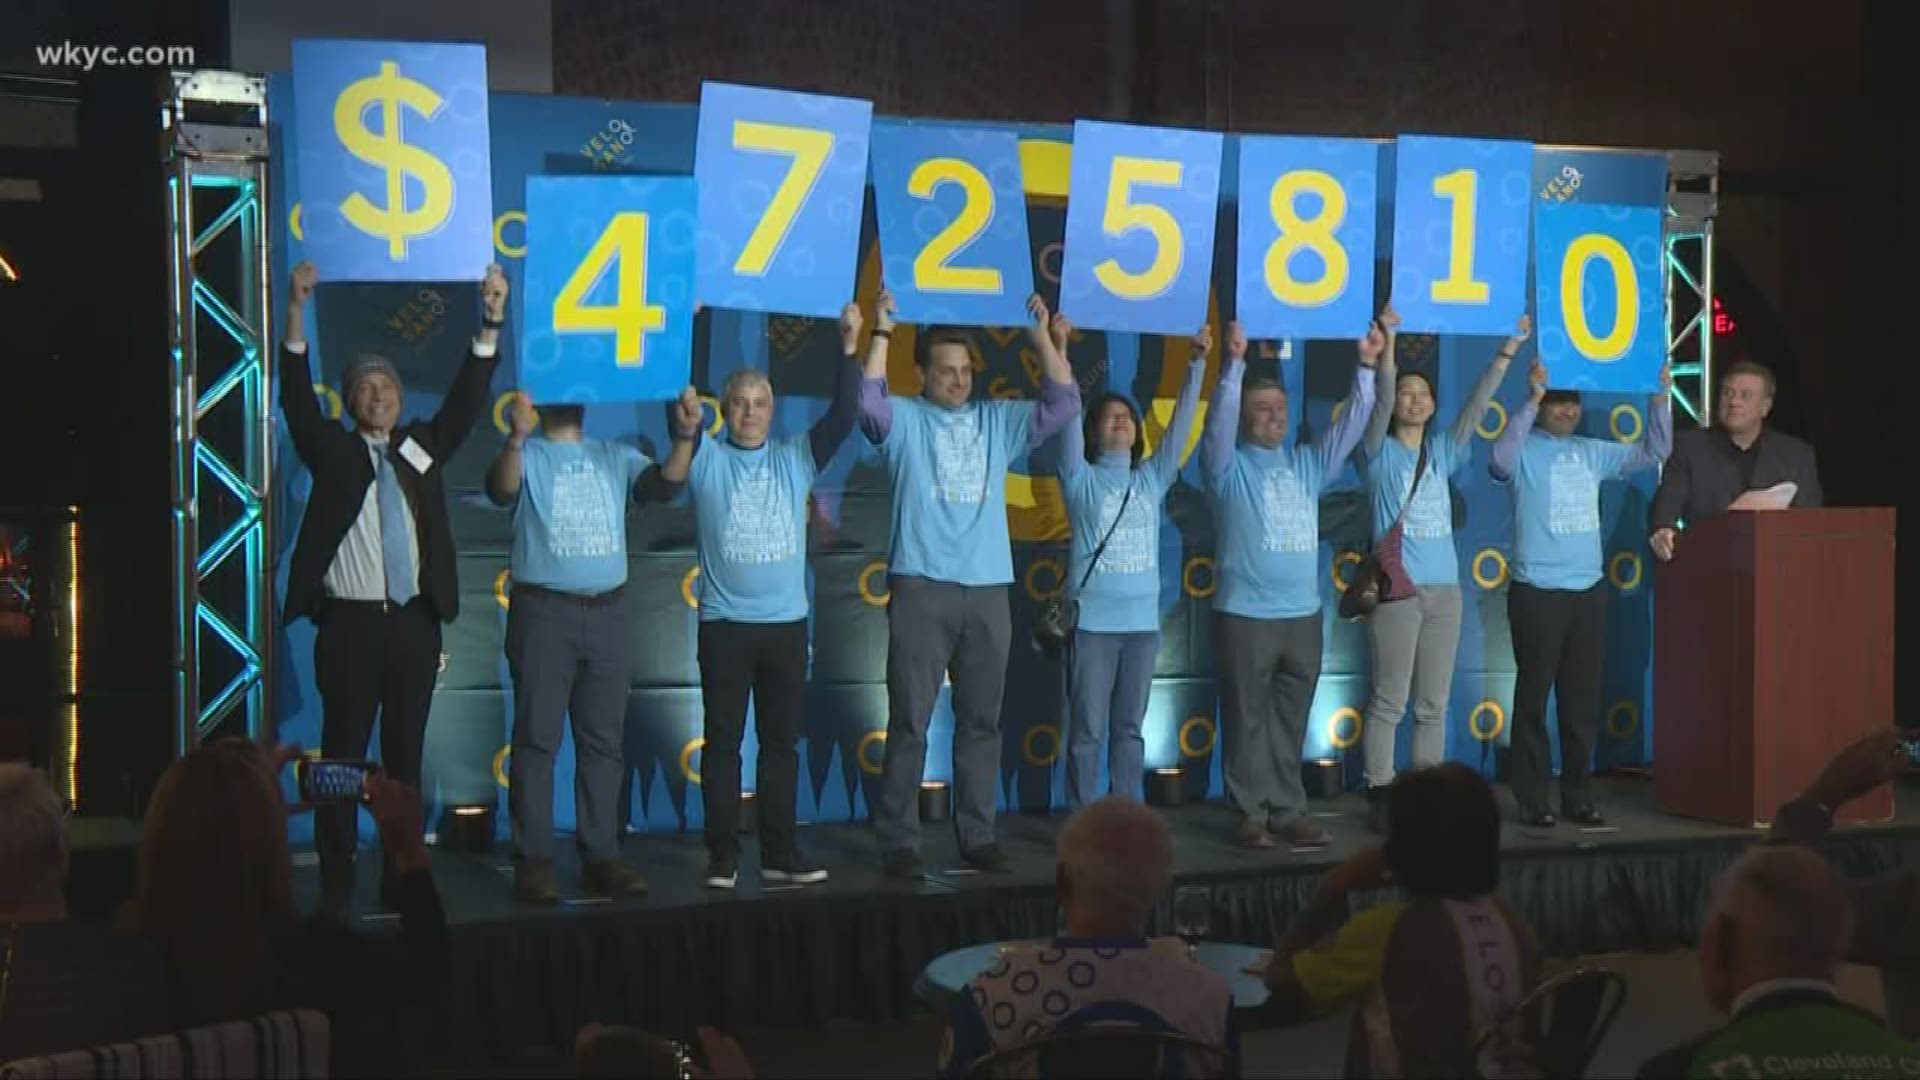 Over $4.7 million raised, with 100% of the money raised supporting lifesaving cancer research at Cleveland Clinic.